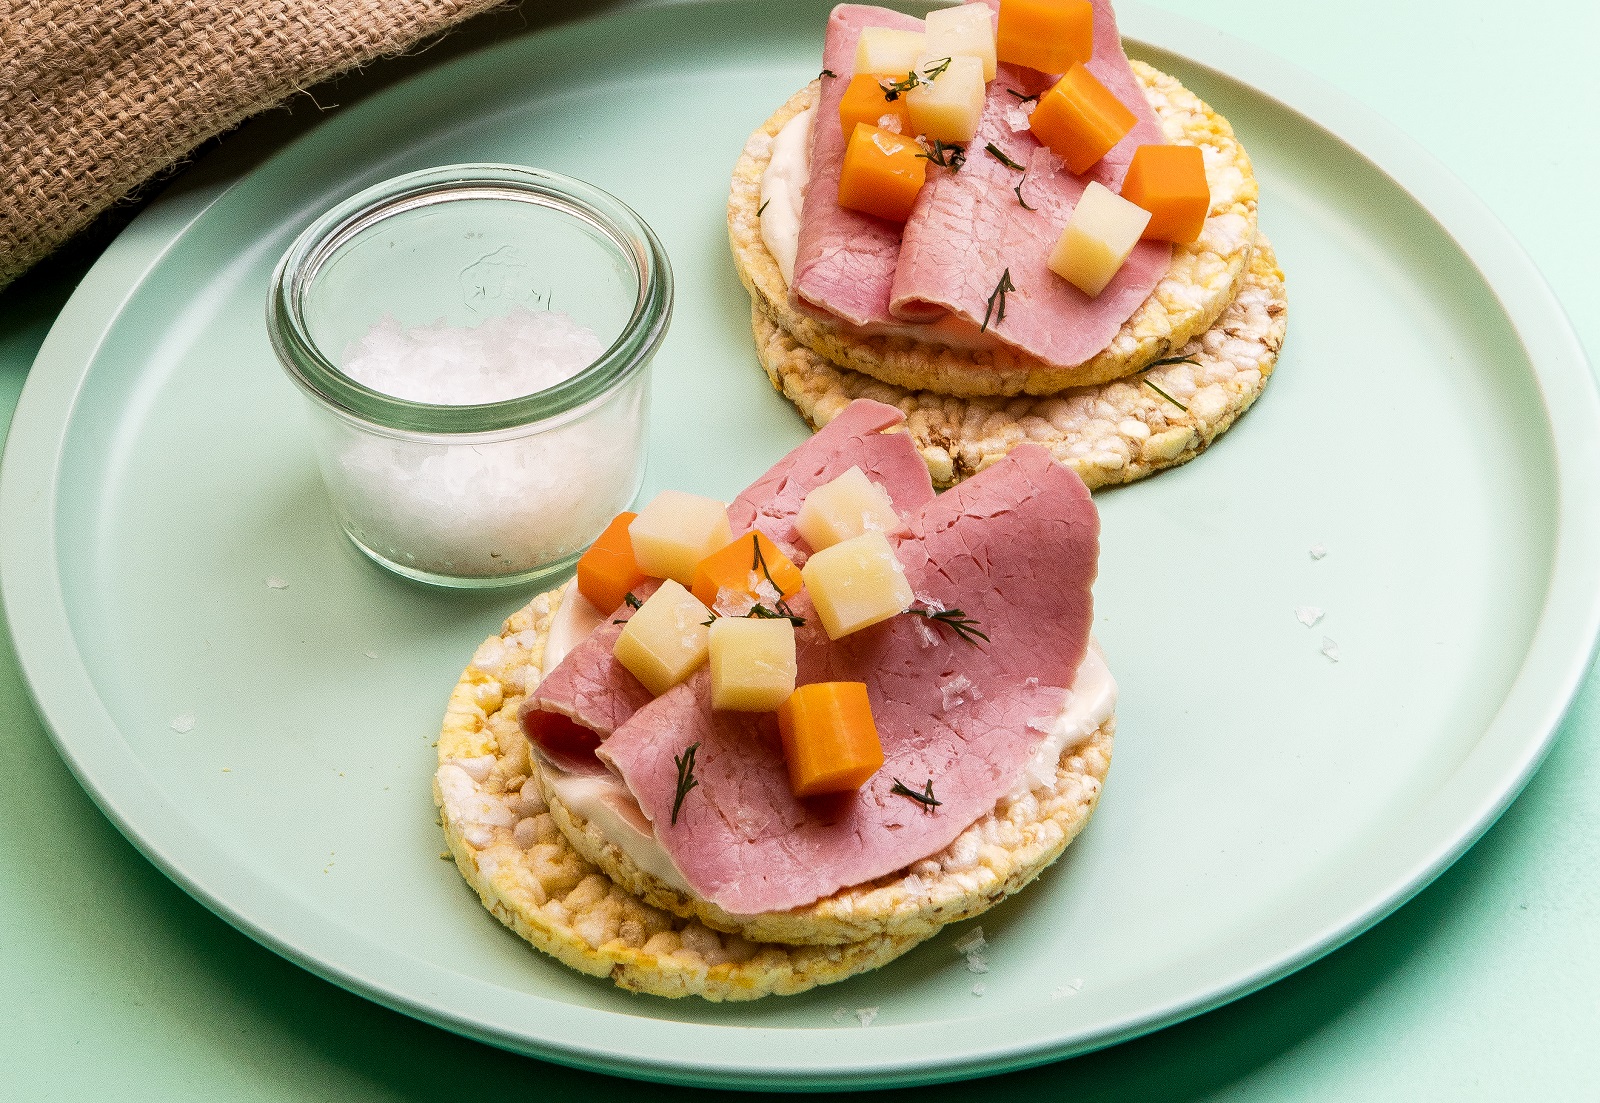 Corned Beef, Boiled Potato, Carrot& White Sauceon CORN THINS slices